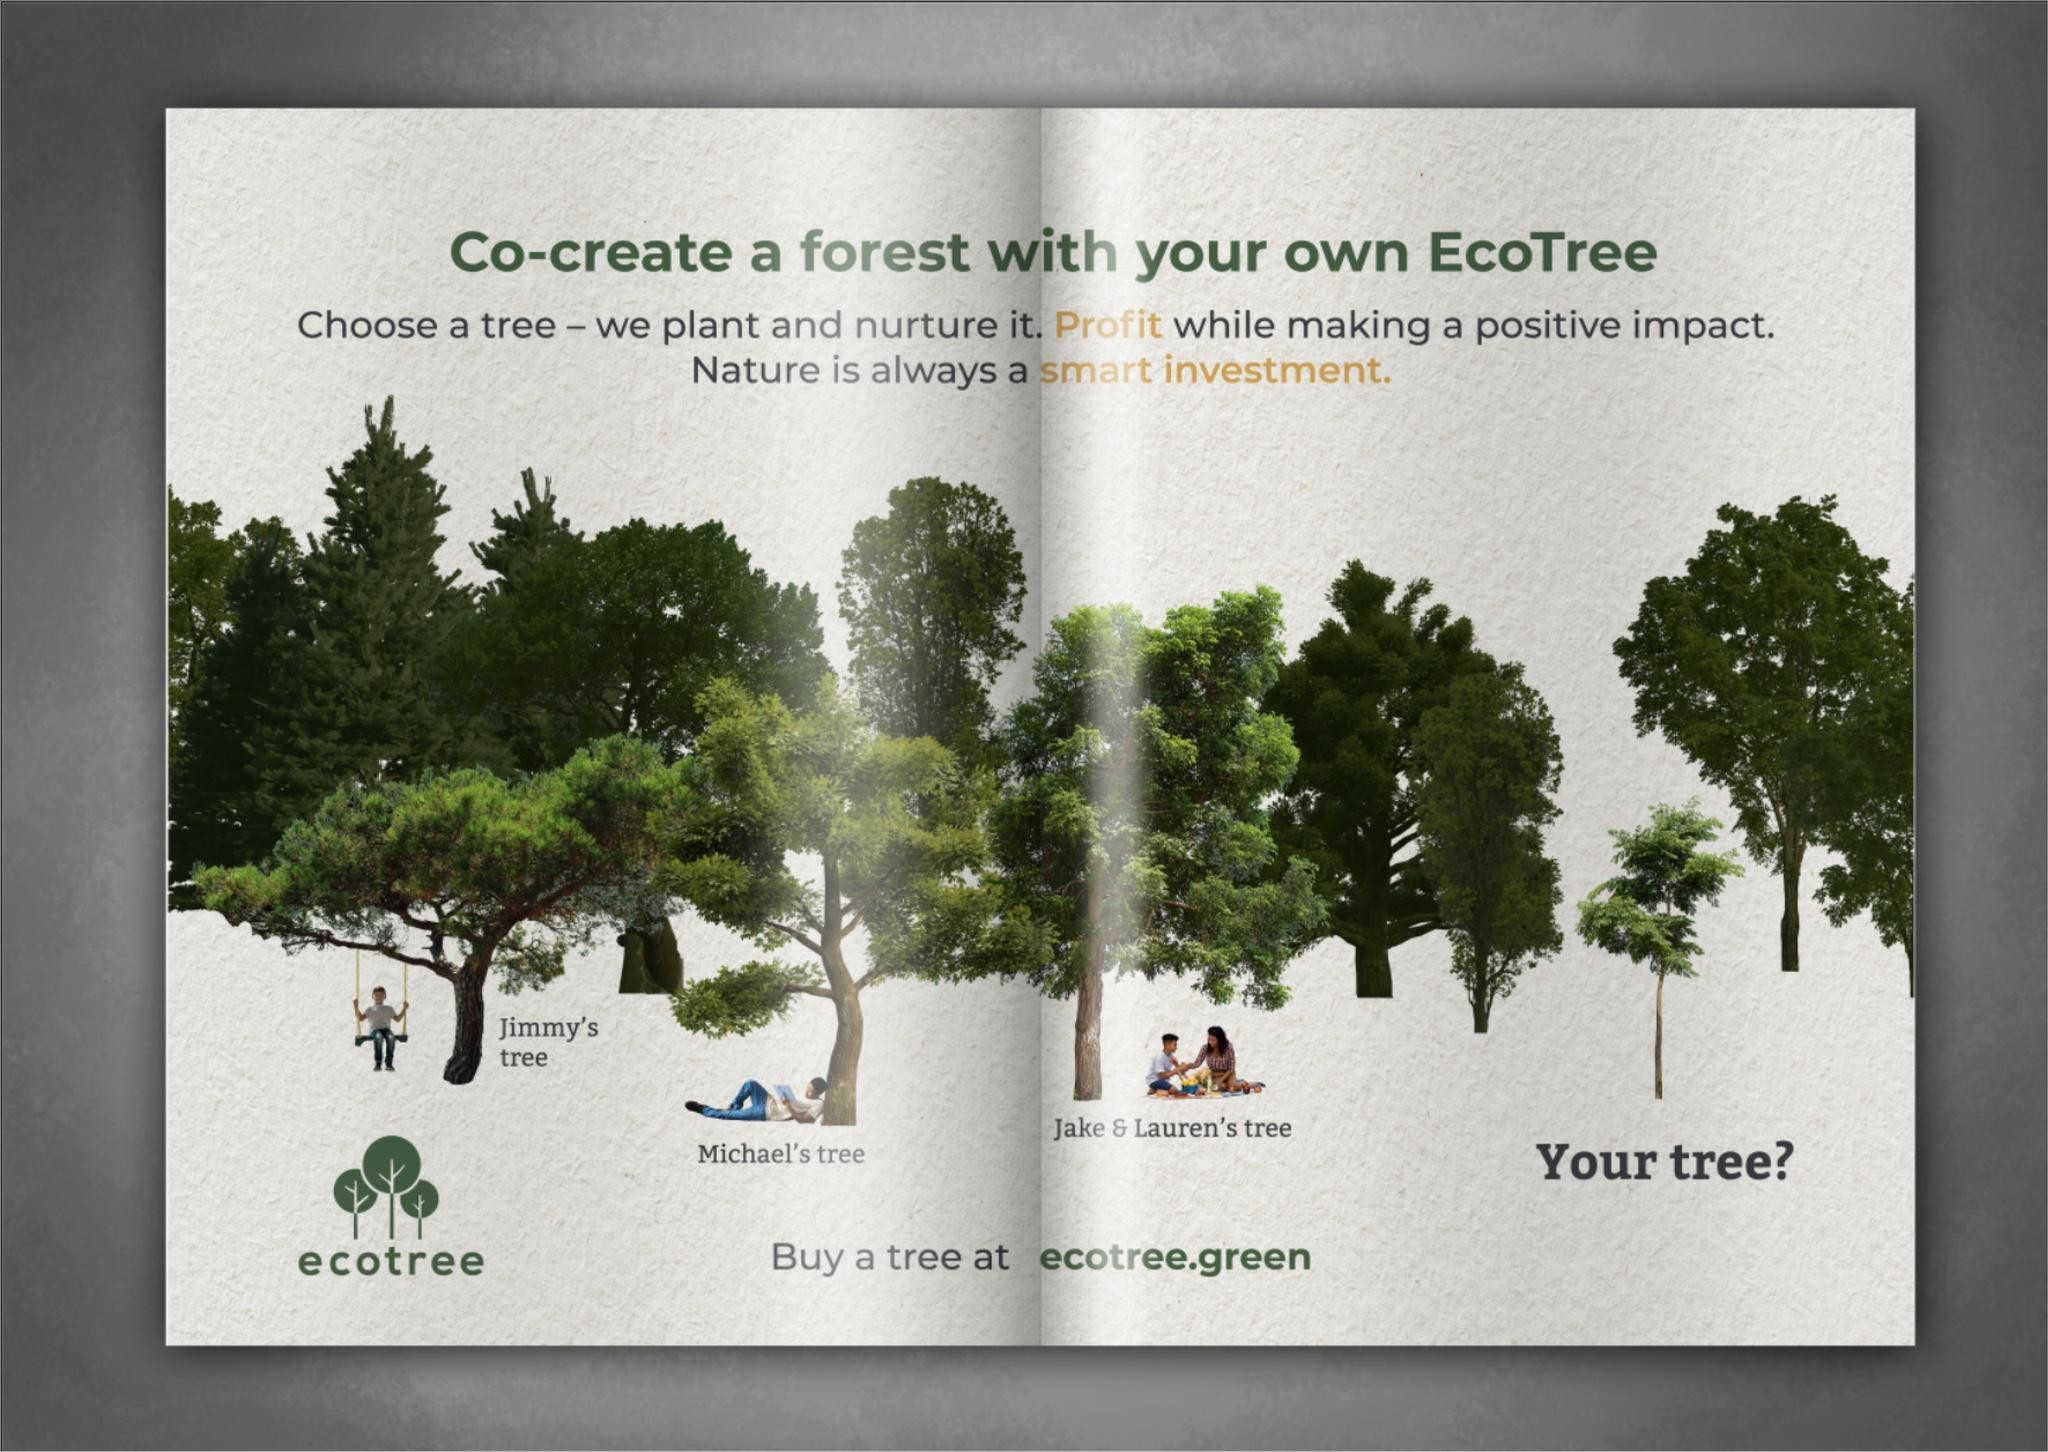 Co-create a forest